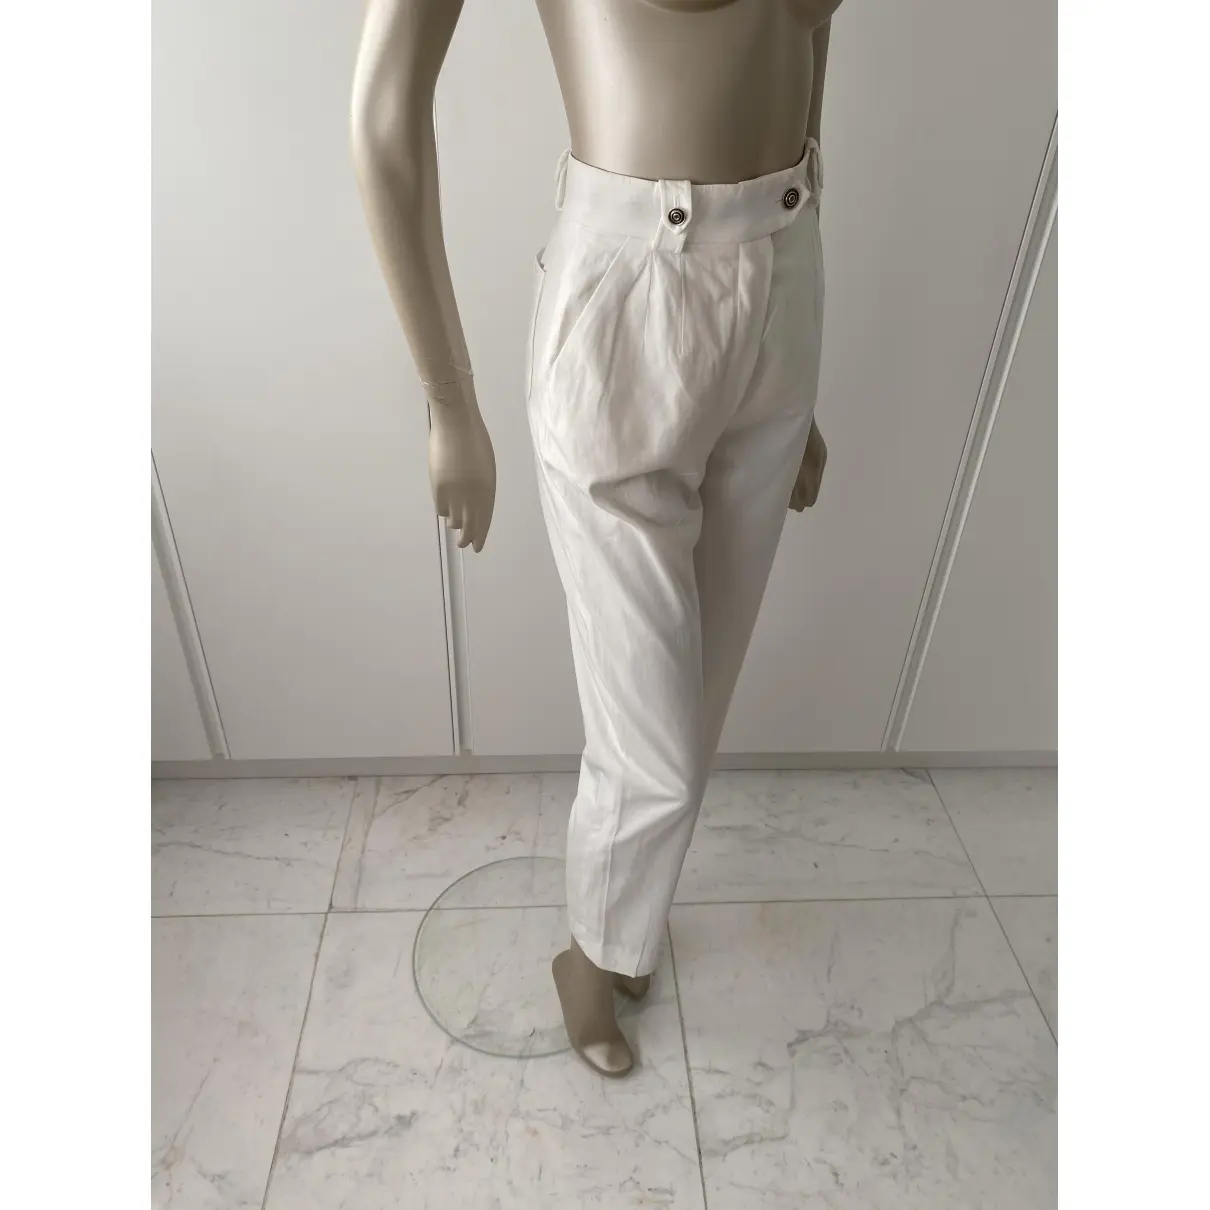 Buy Chanel Trousers online - Vintage